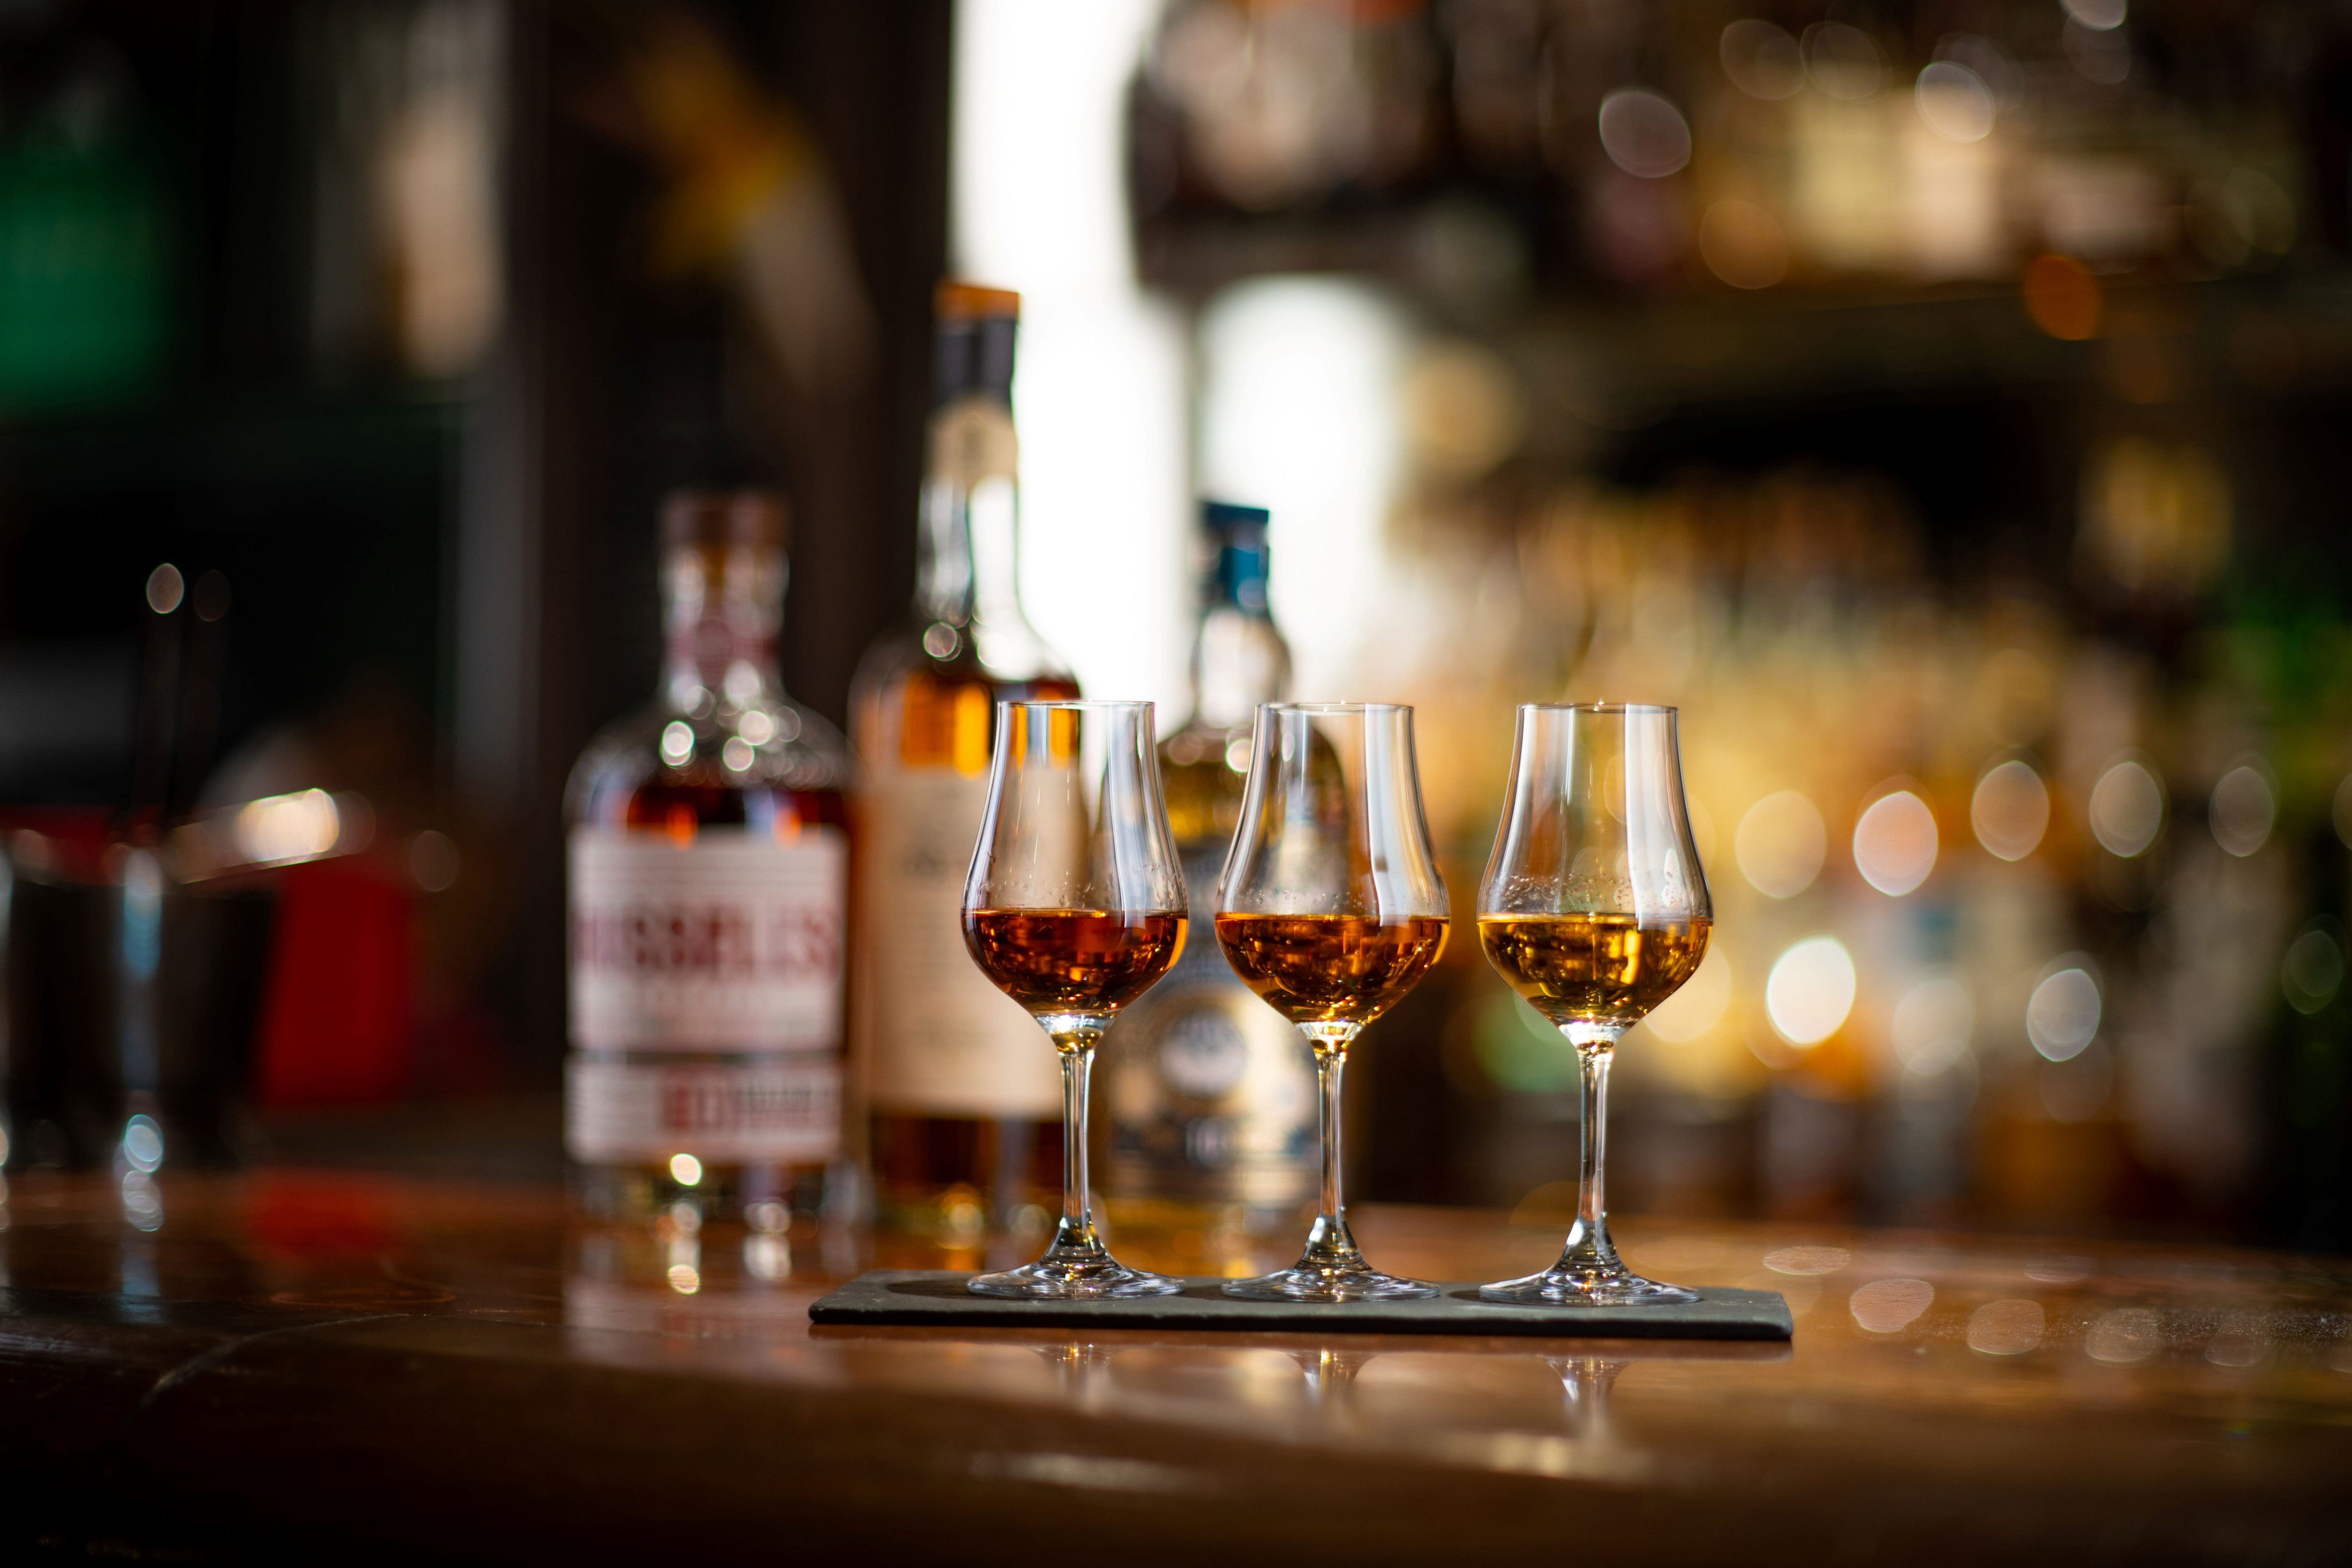 The Whisky Journey